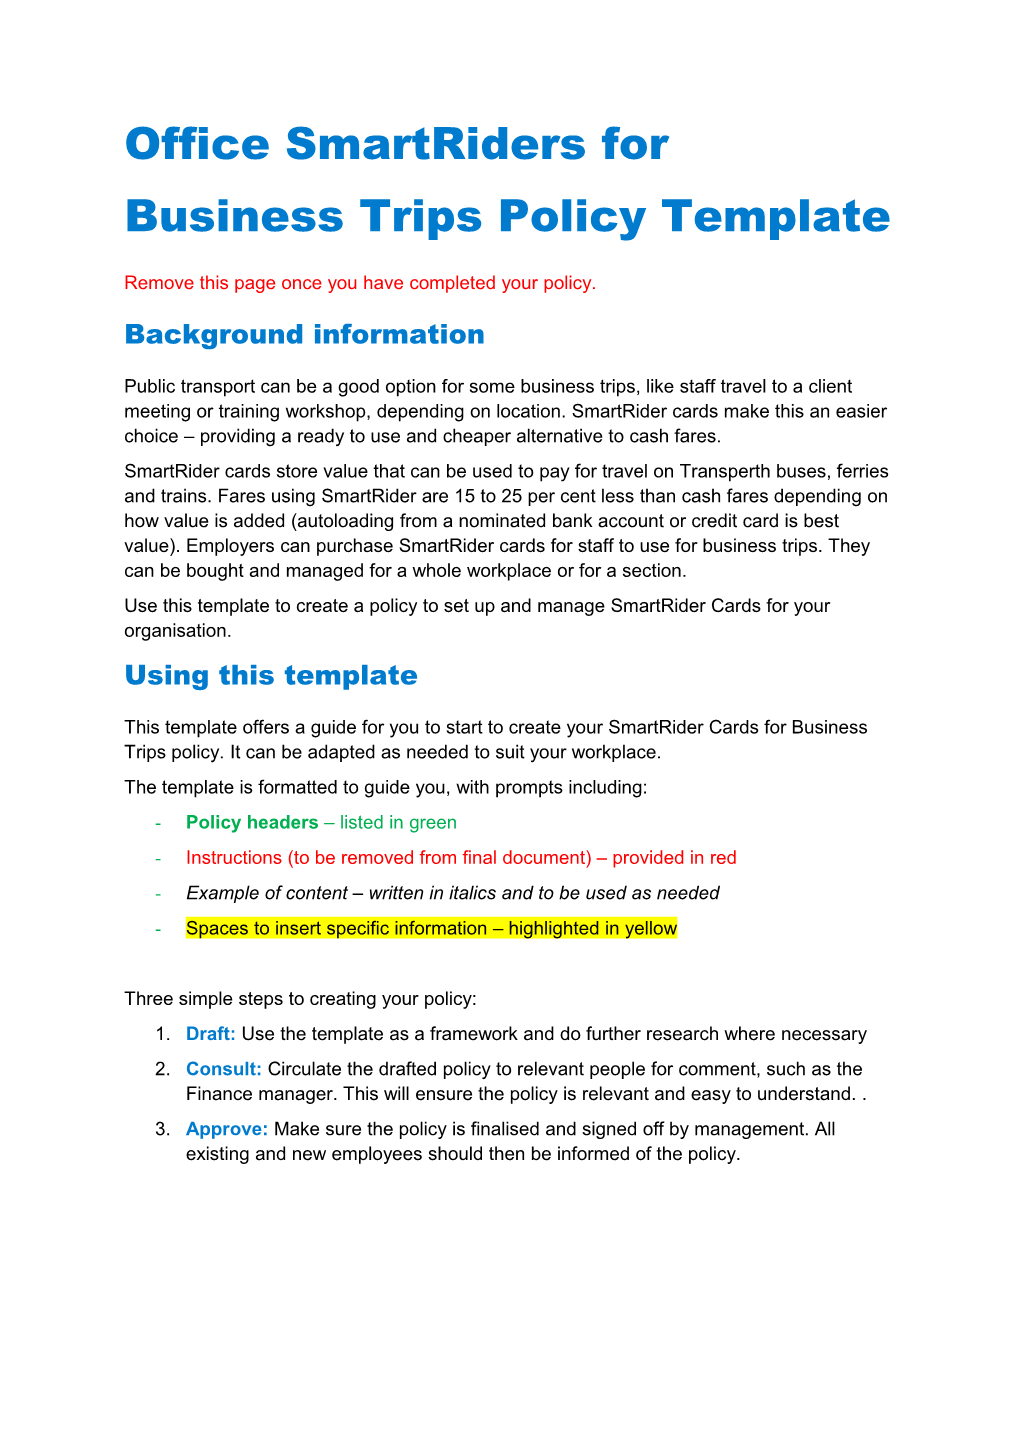 Office Smartriders for Business Trips Policy Template